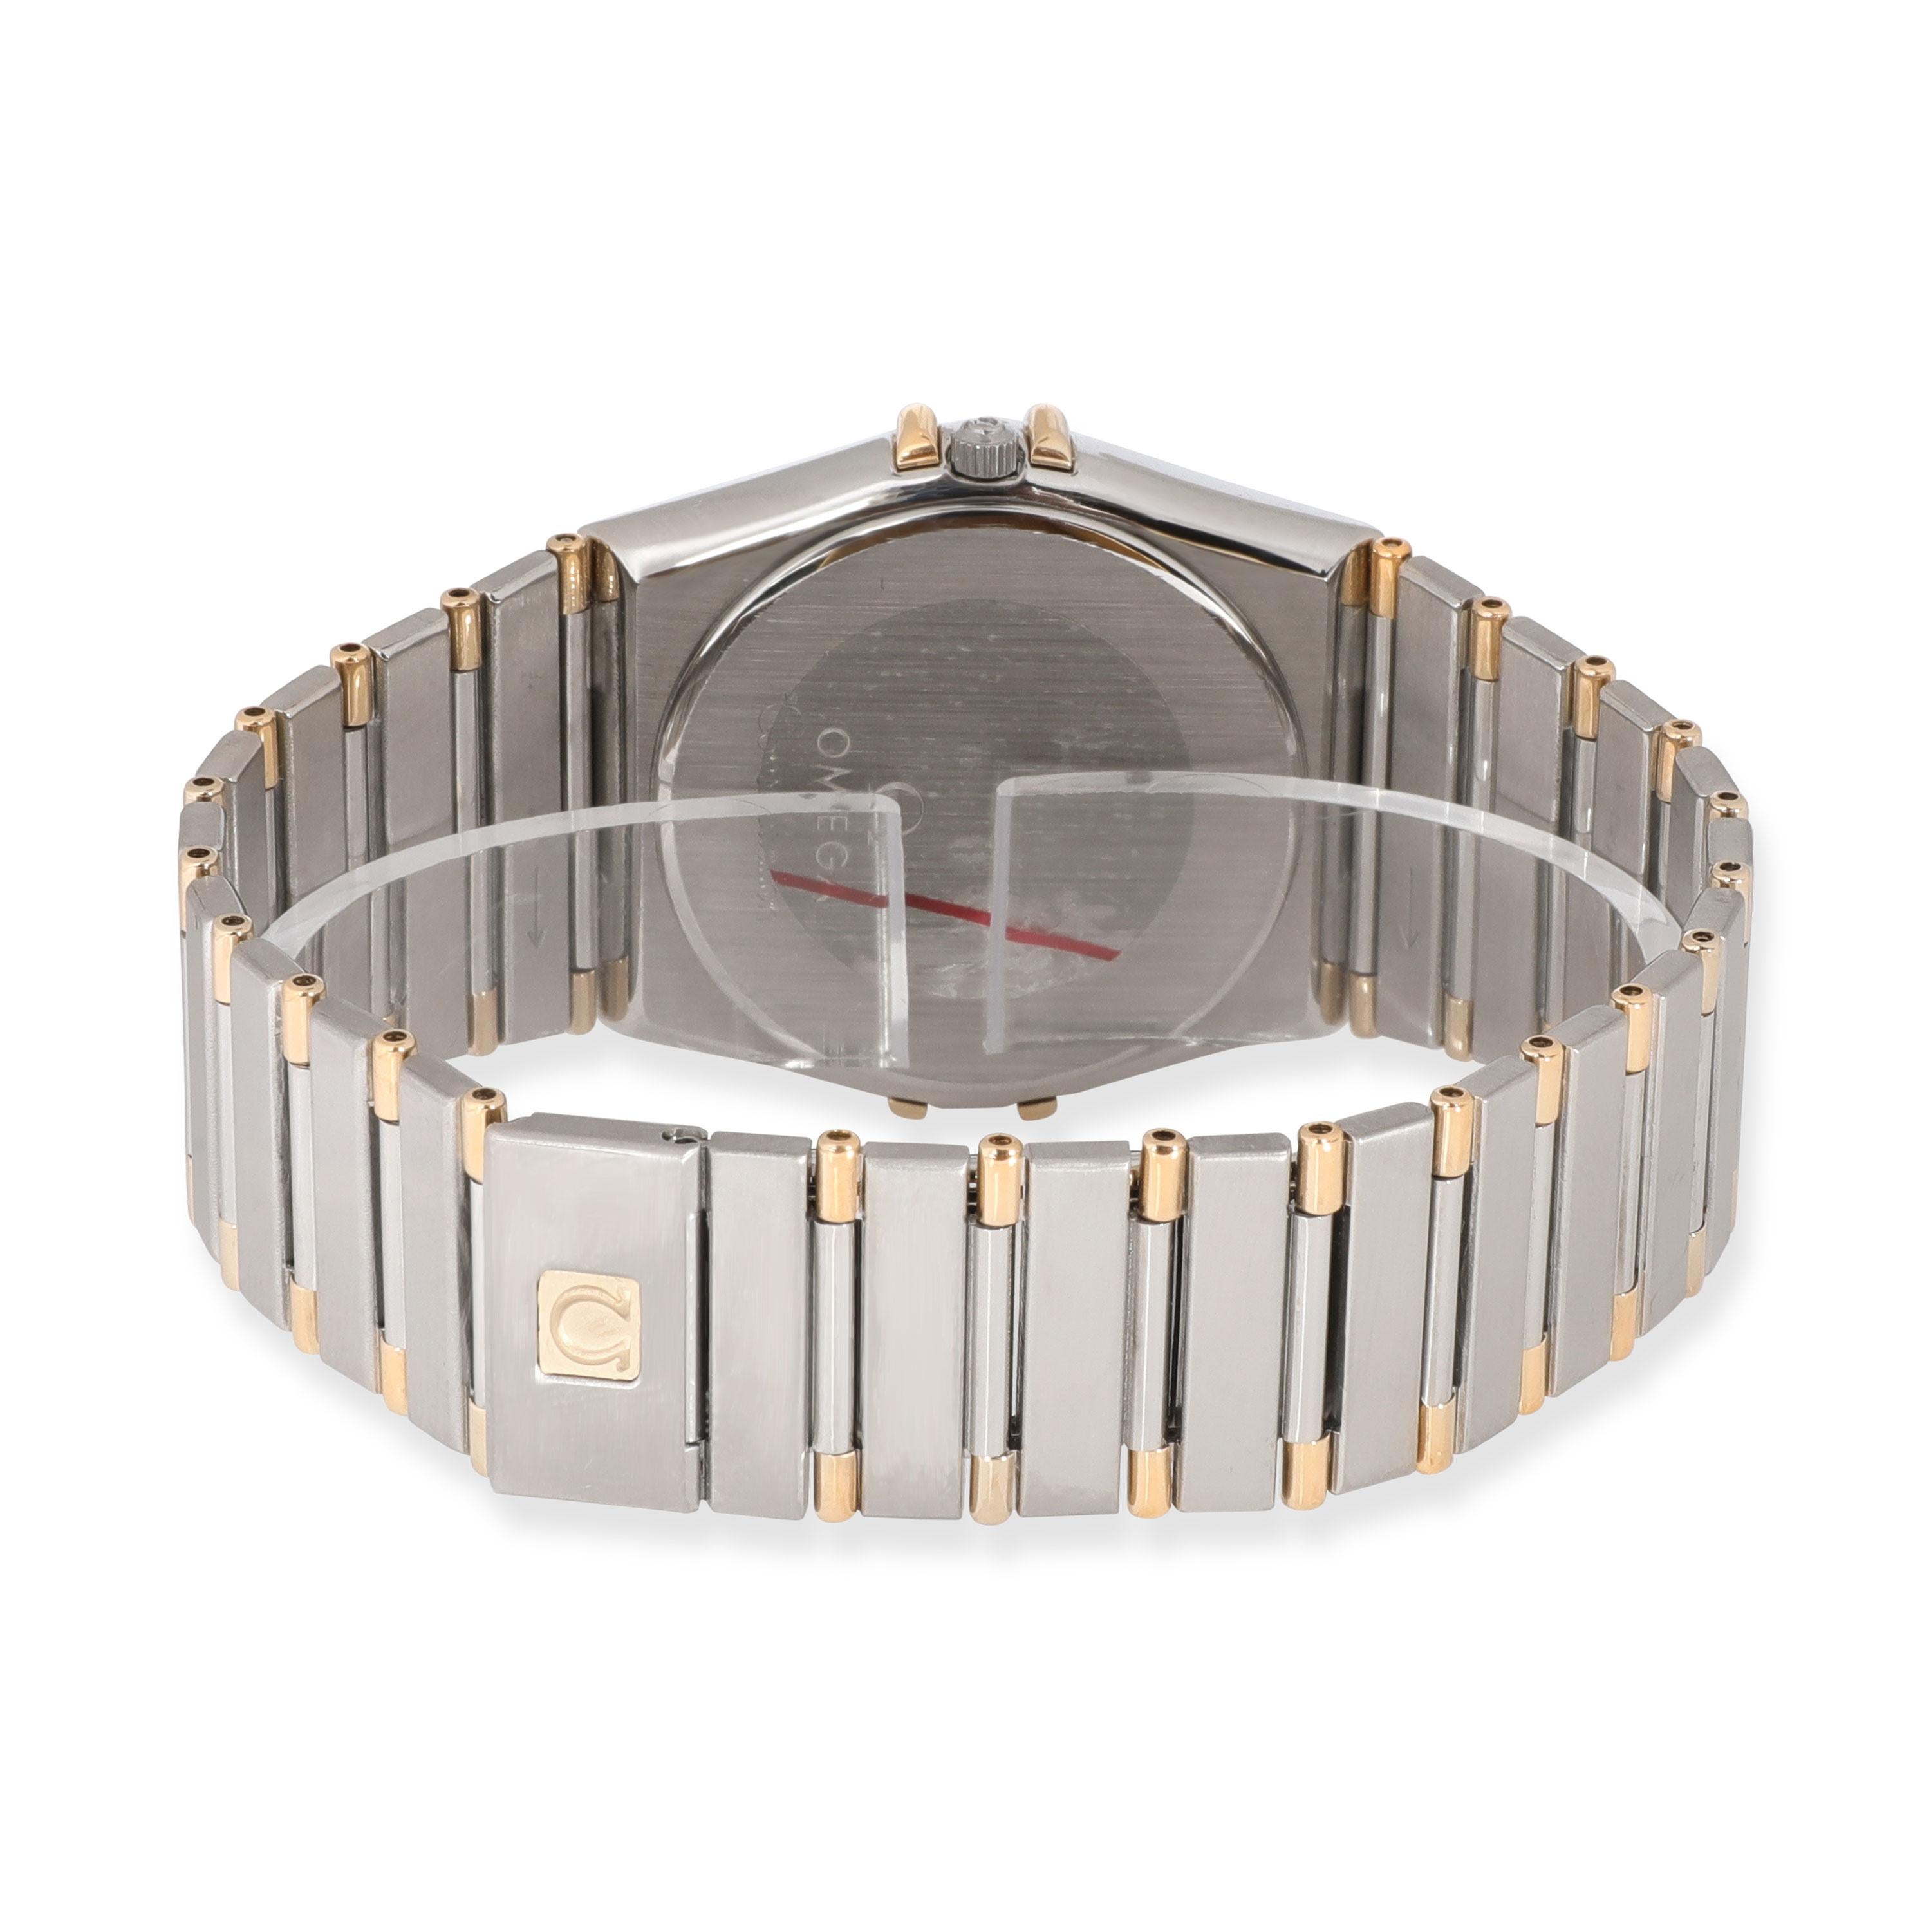 Omega Constellation Men's Band Stainless Steel and 18K Yellow Gold

SKU: 027068

PRIMARY DETAILS
Brand: Omega
Model: Constellation
Country of Origin: Switzerland
Movement Type: Quartz: Battery
Year of Manufacture: 1980-1989
Condition: Retail price